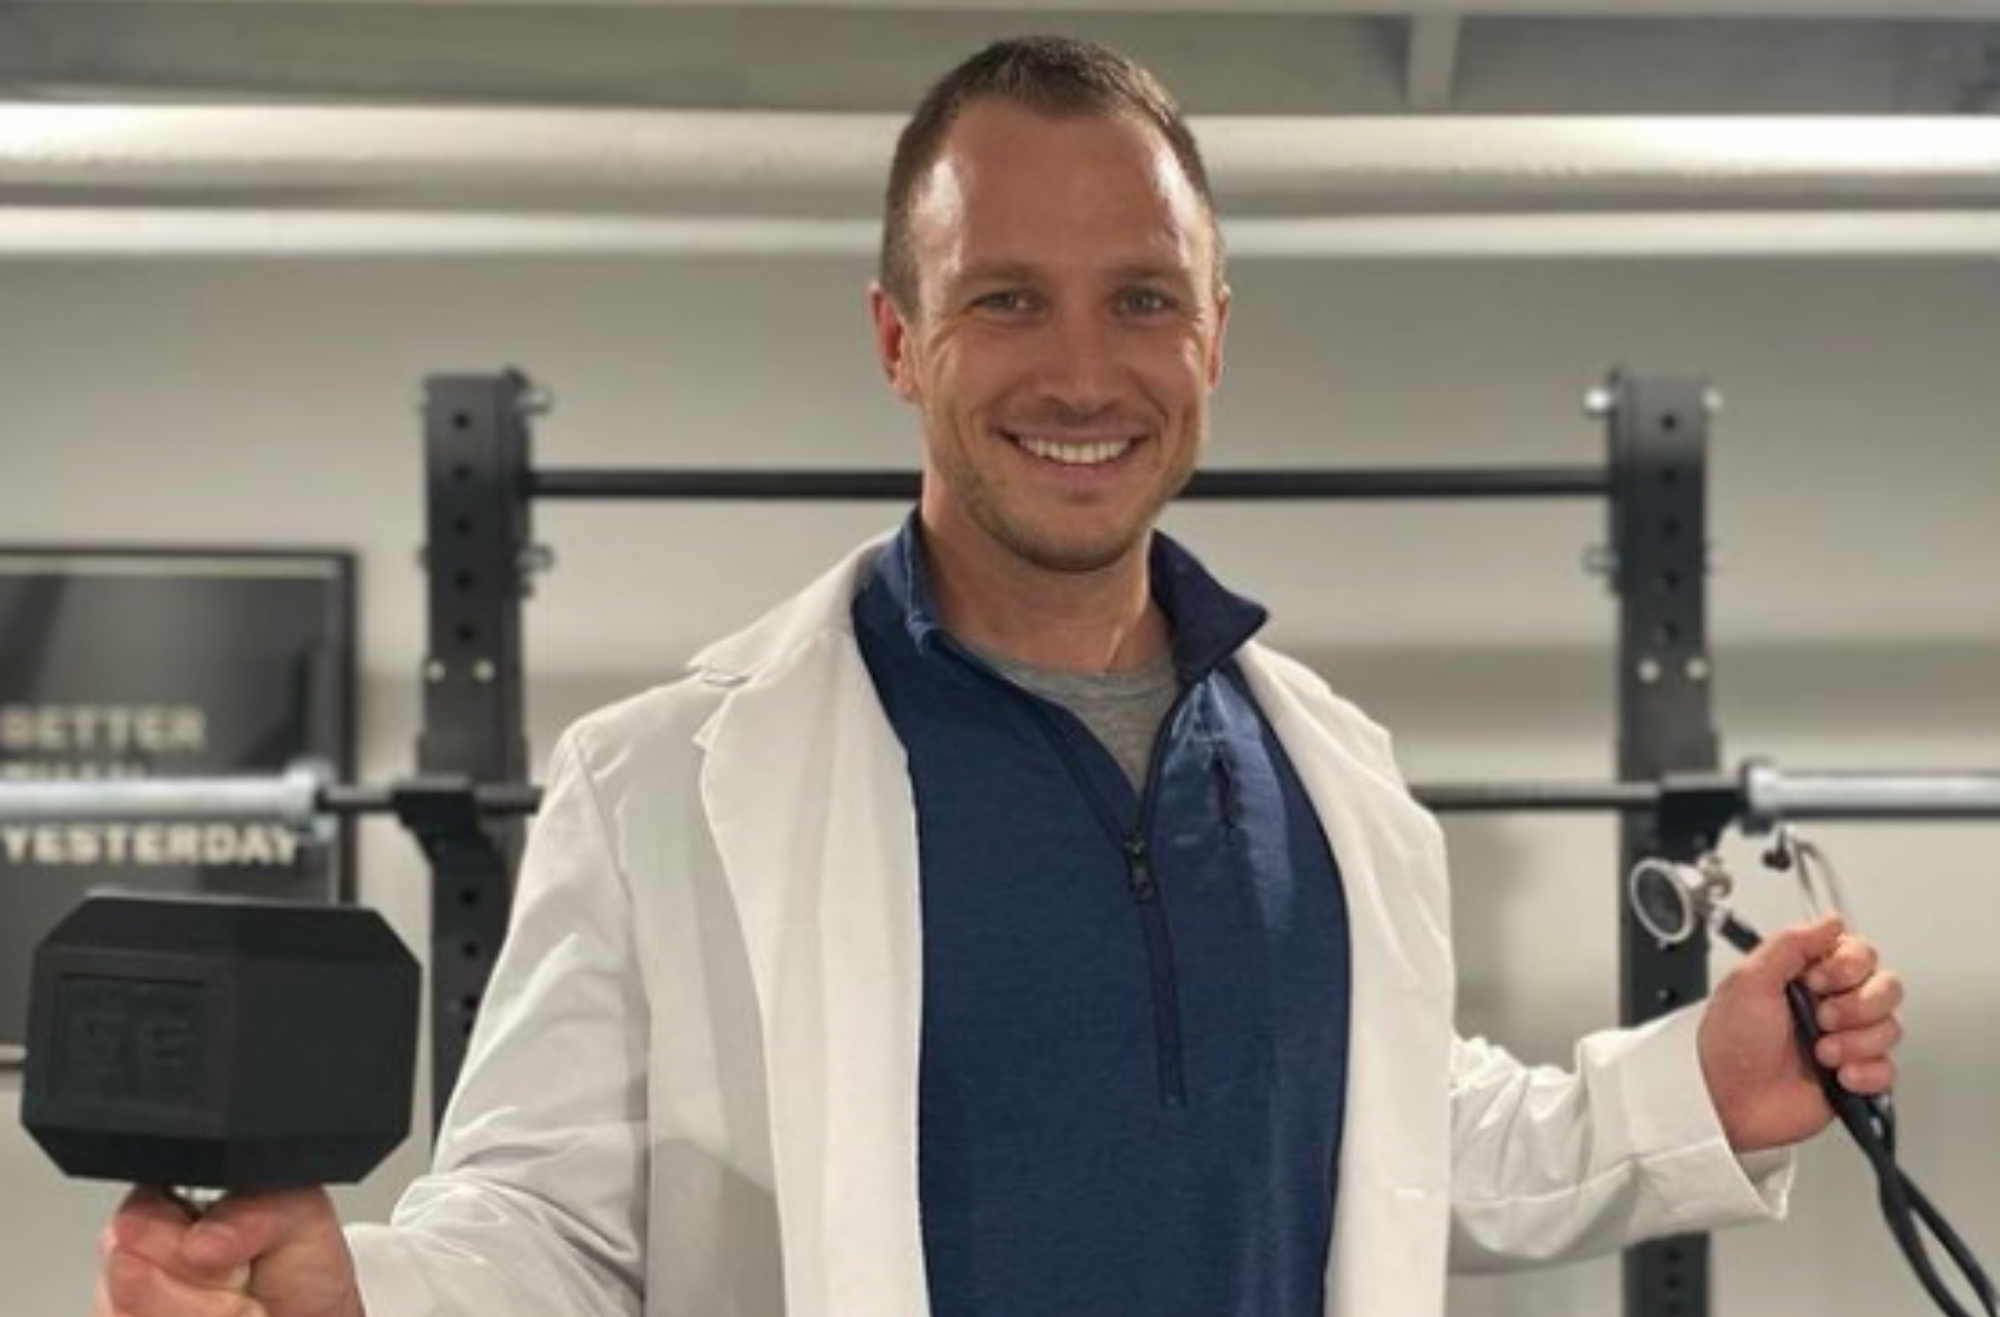 Learn a little more about me, what I do at work, and why I’m so passionate about spreading the word that EXERCISE IS MEDICINE!  